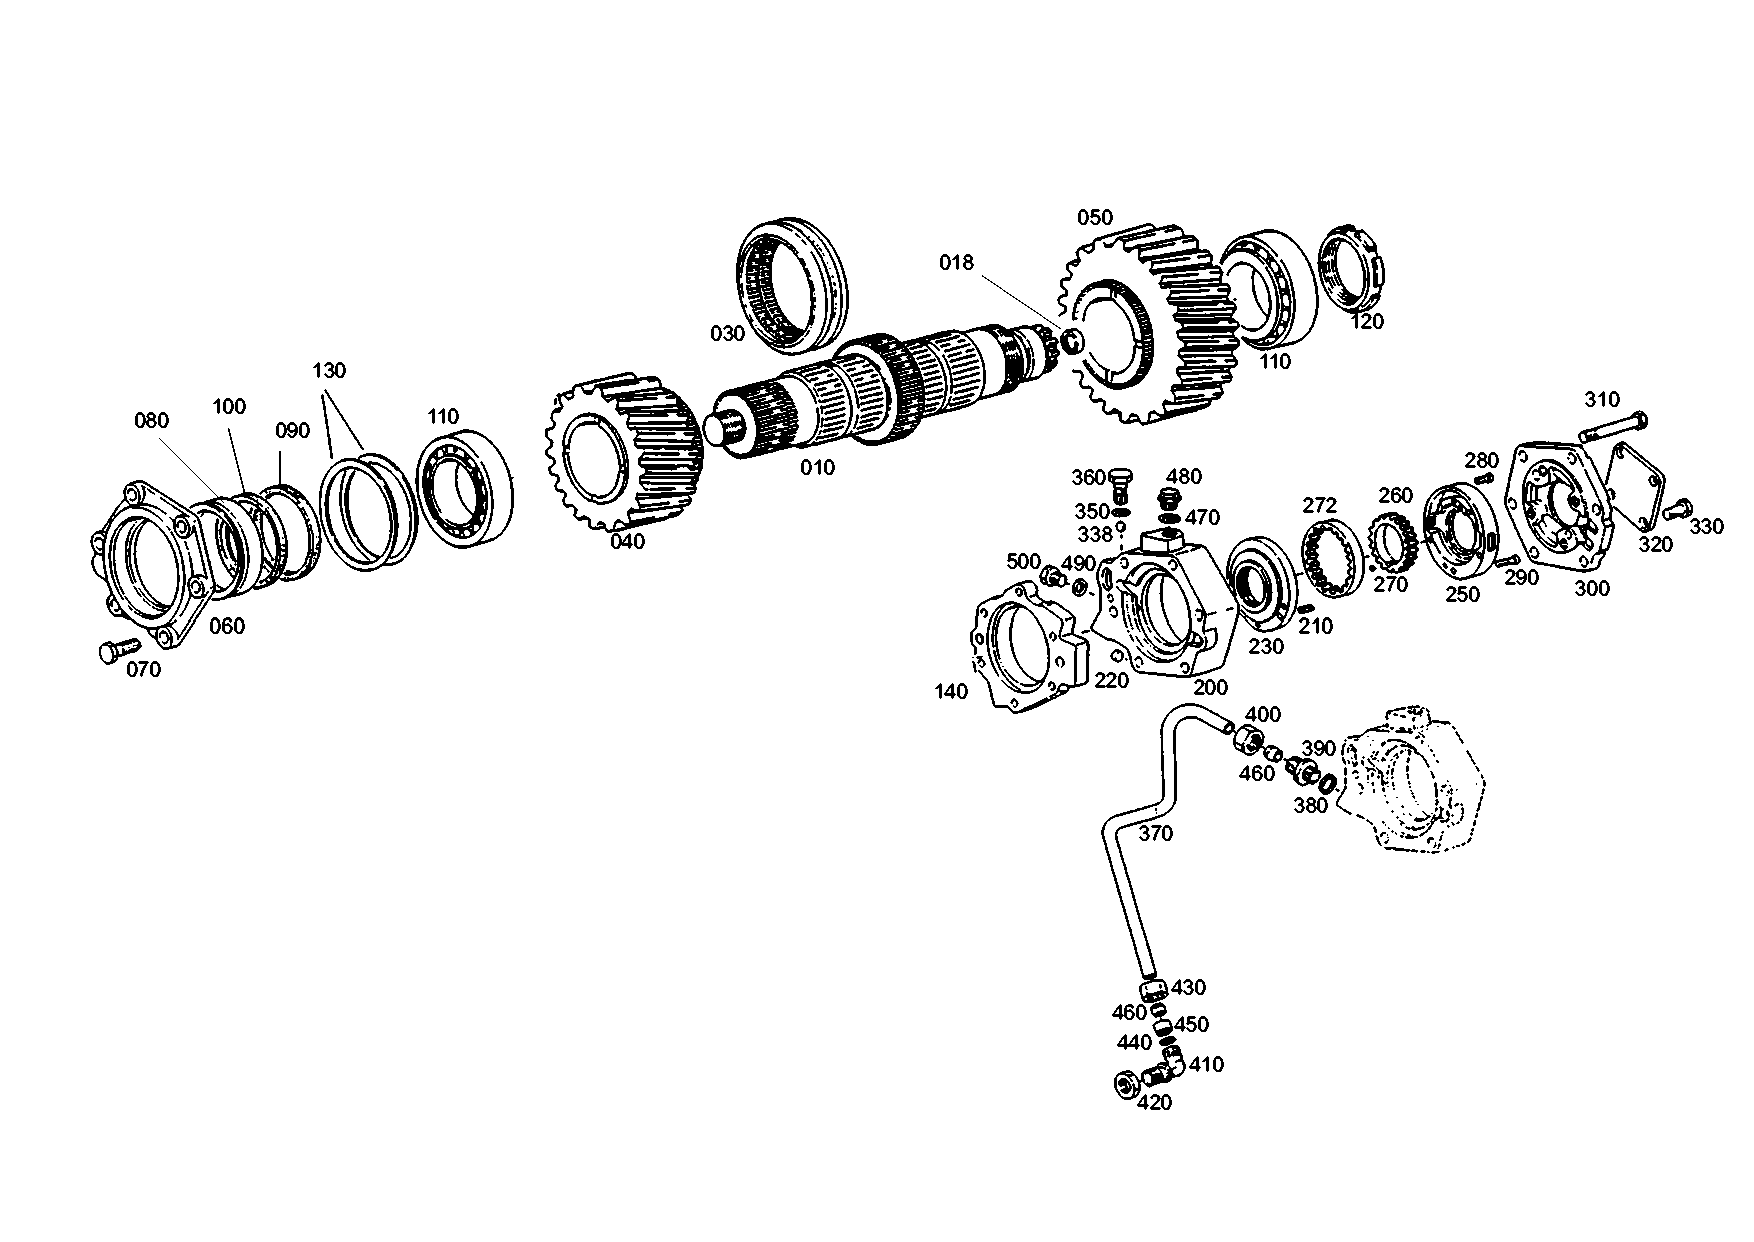 drawing for MARMON Herring MVG201120 - INPUT SHAFT (figure 4)